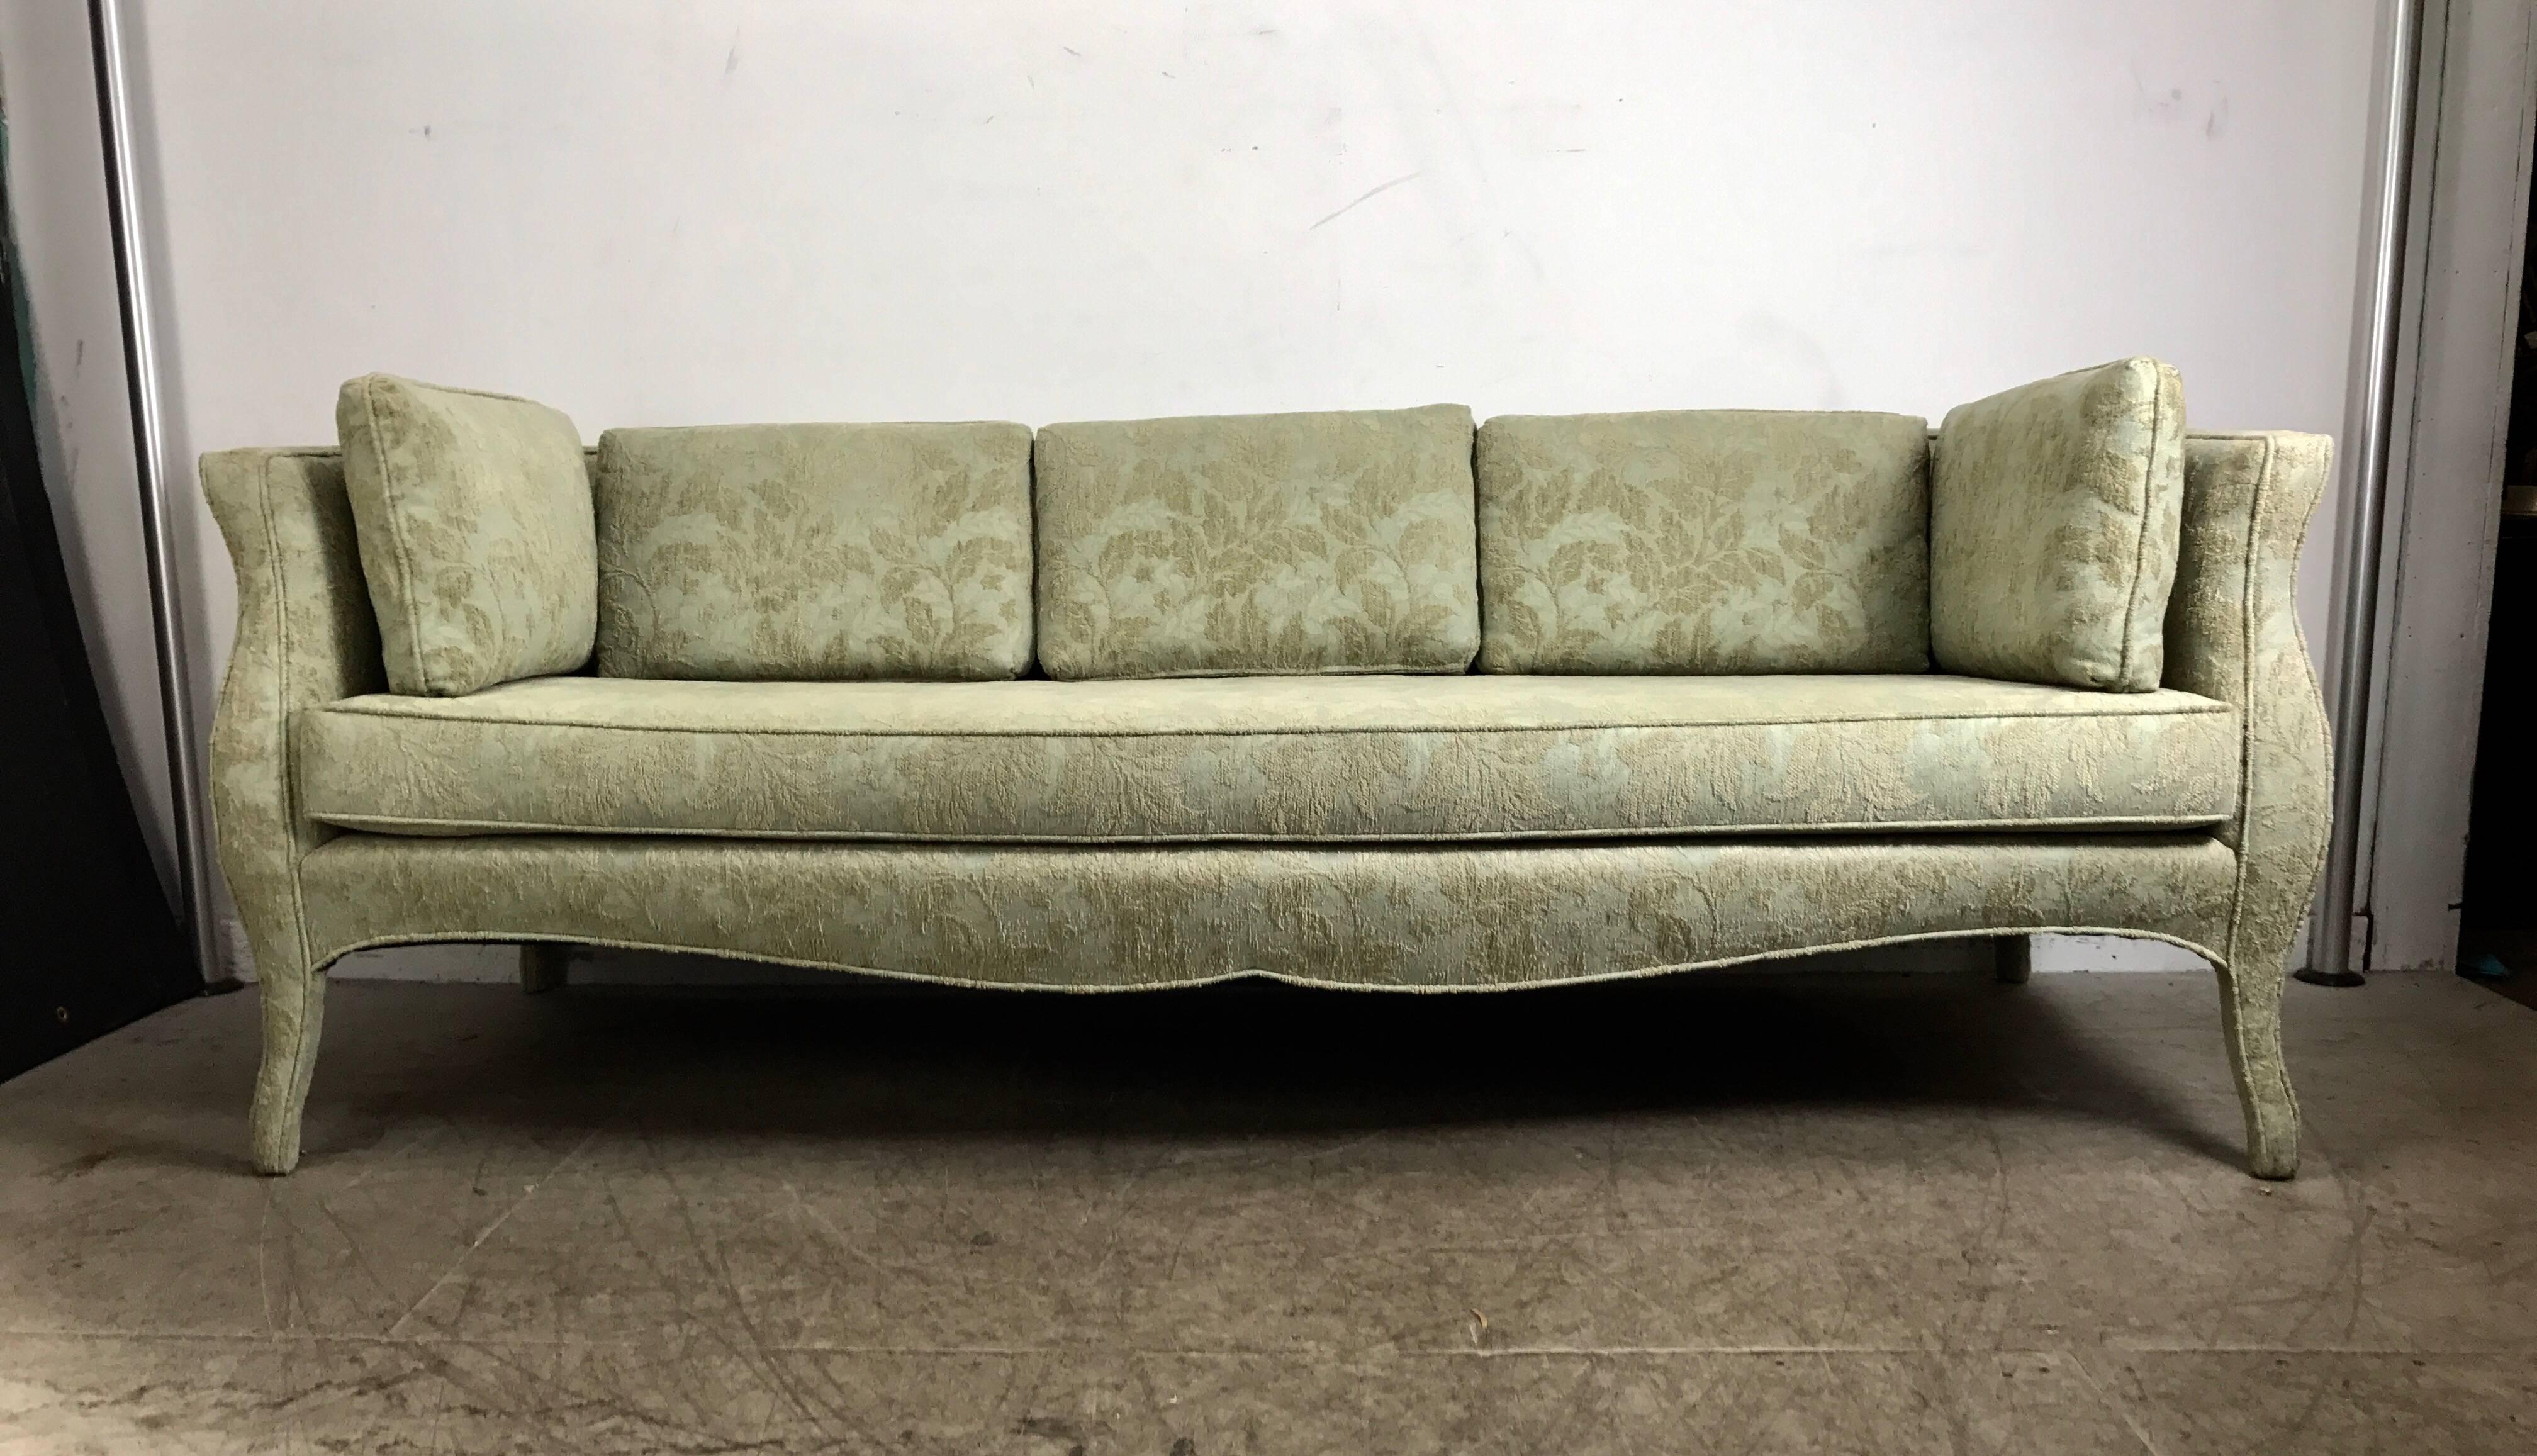 Unusual Sofa, Bombay shape, upholstered legs, Baker Furniture. Retains original celadon green fabric upholstery, Fits seamlessly into any environment, Stunning